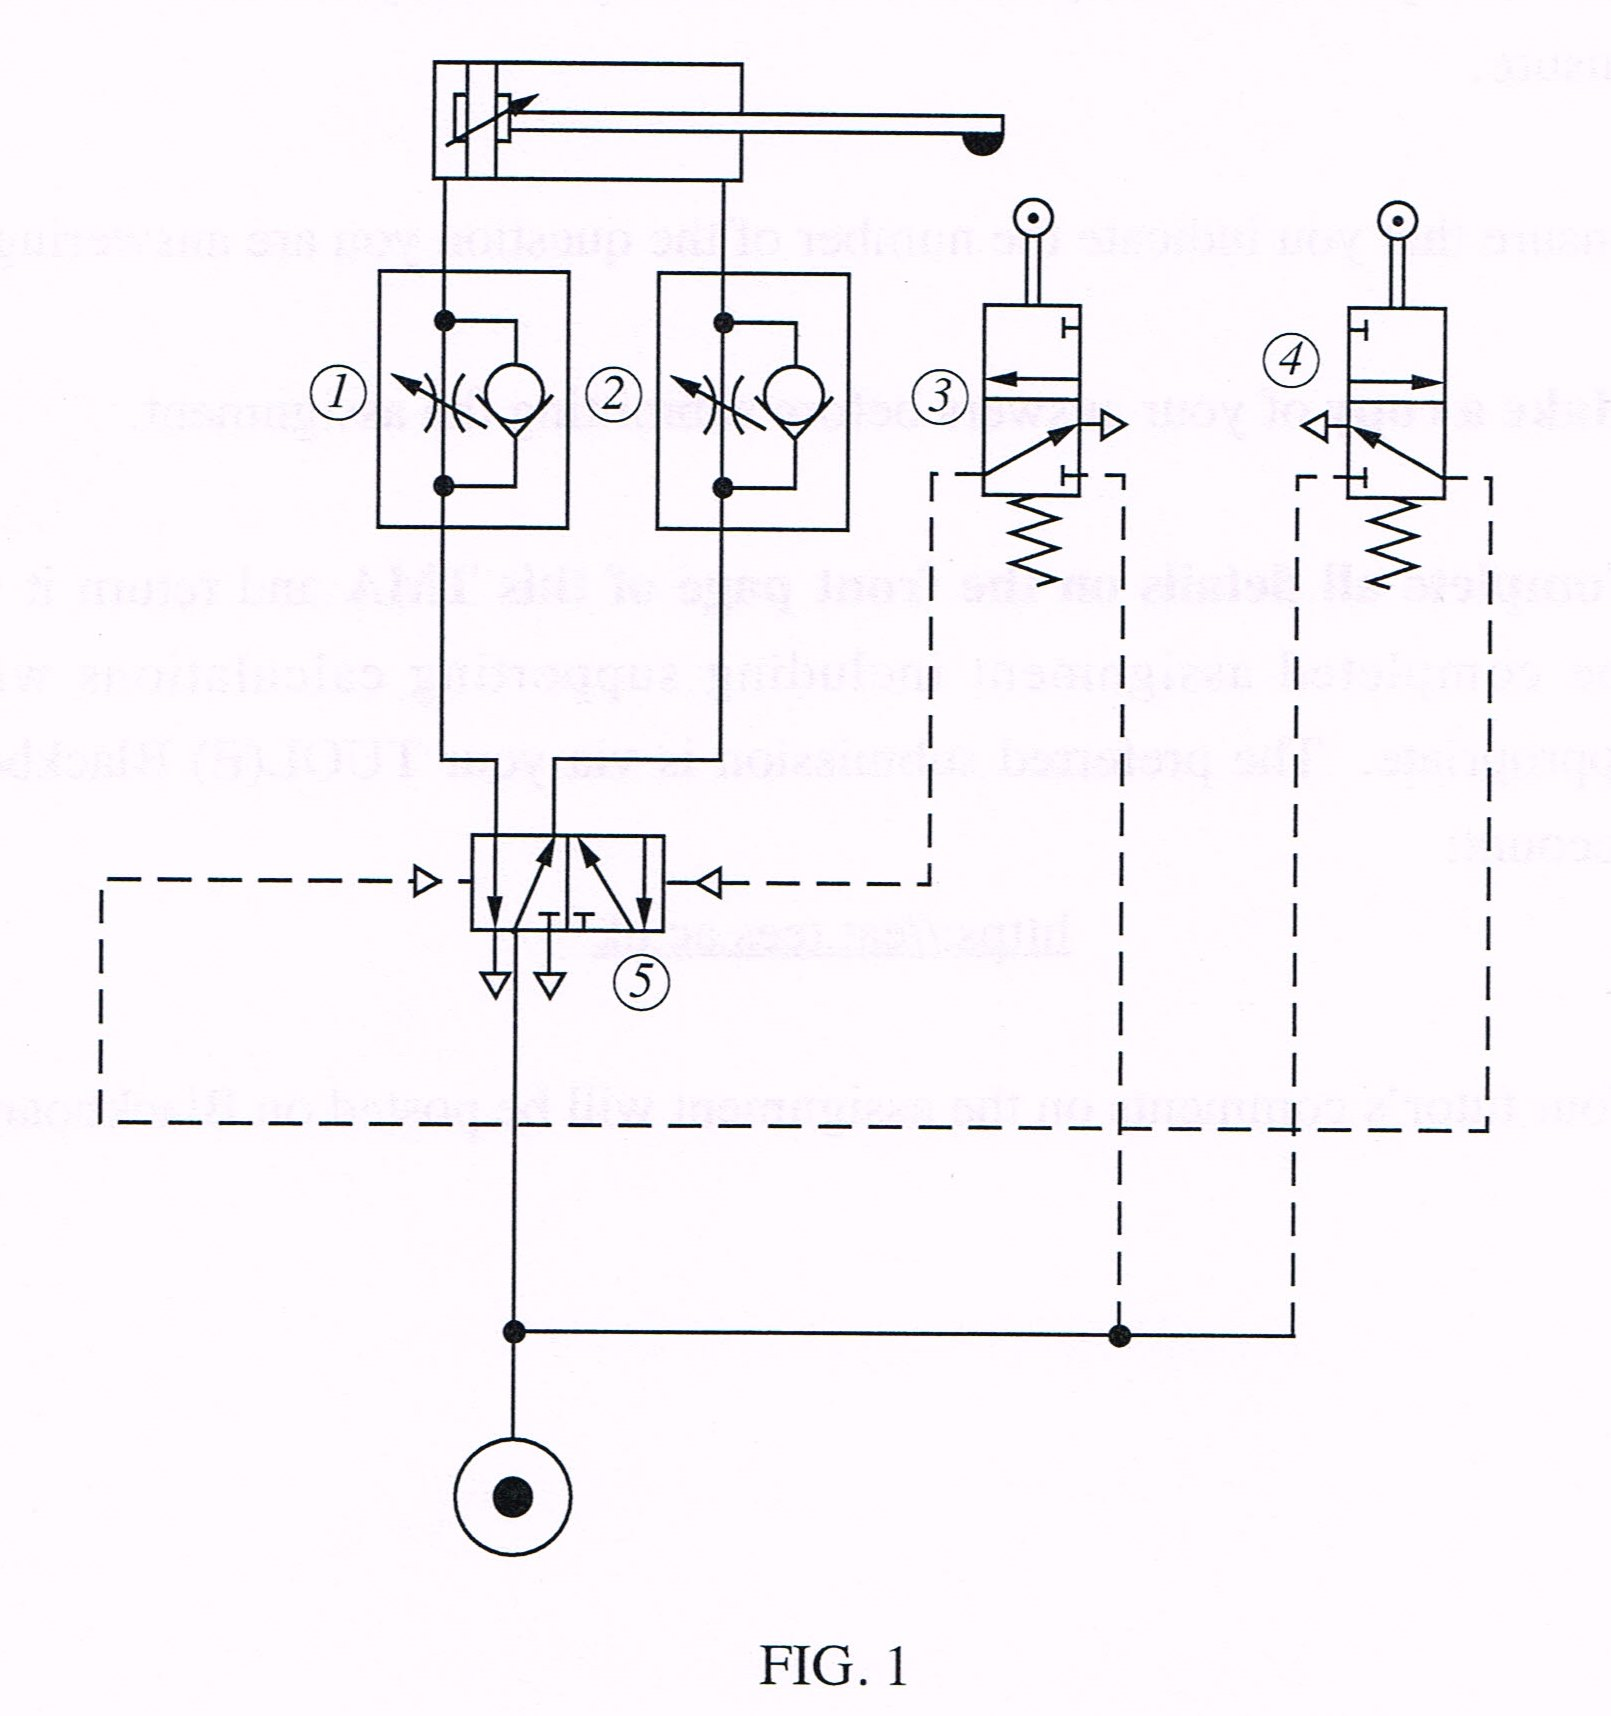 Solved: Fig 1 Shows A Pneumatic Circuit Diagram Used For A ...